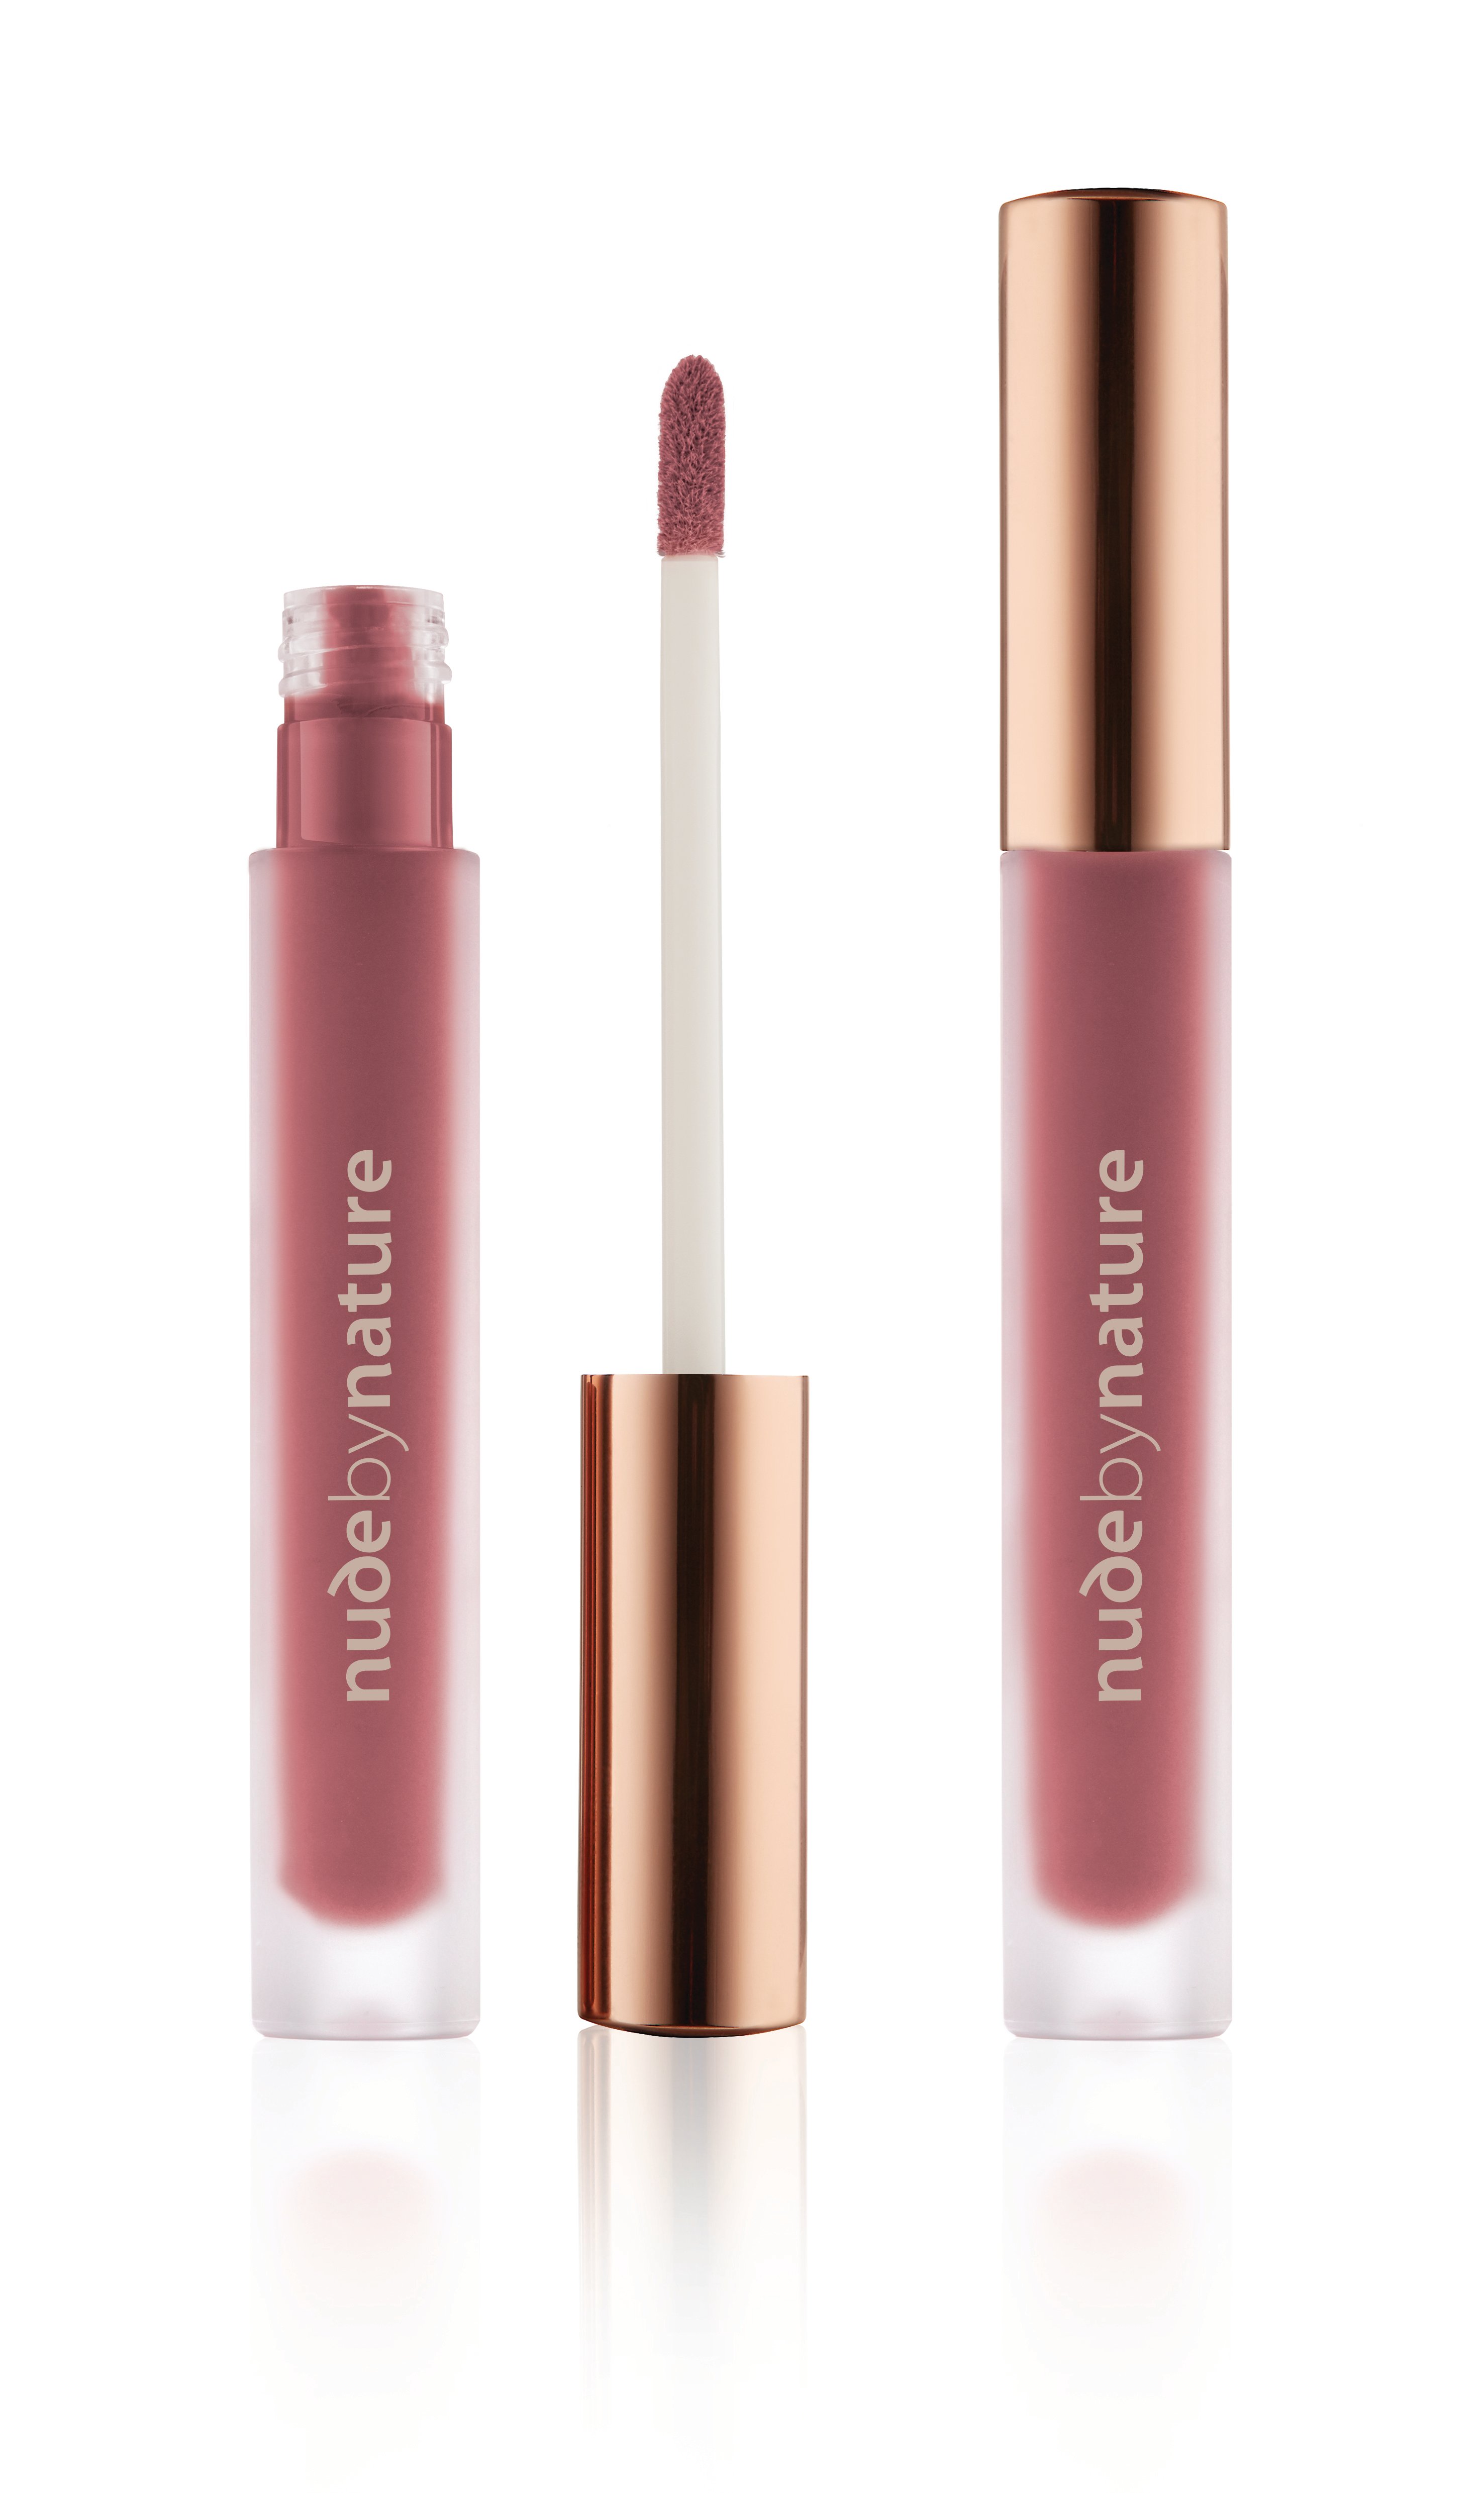 Nude by Nature - Satin Liquid Lipstick - 07 Orchid